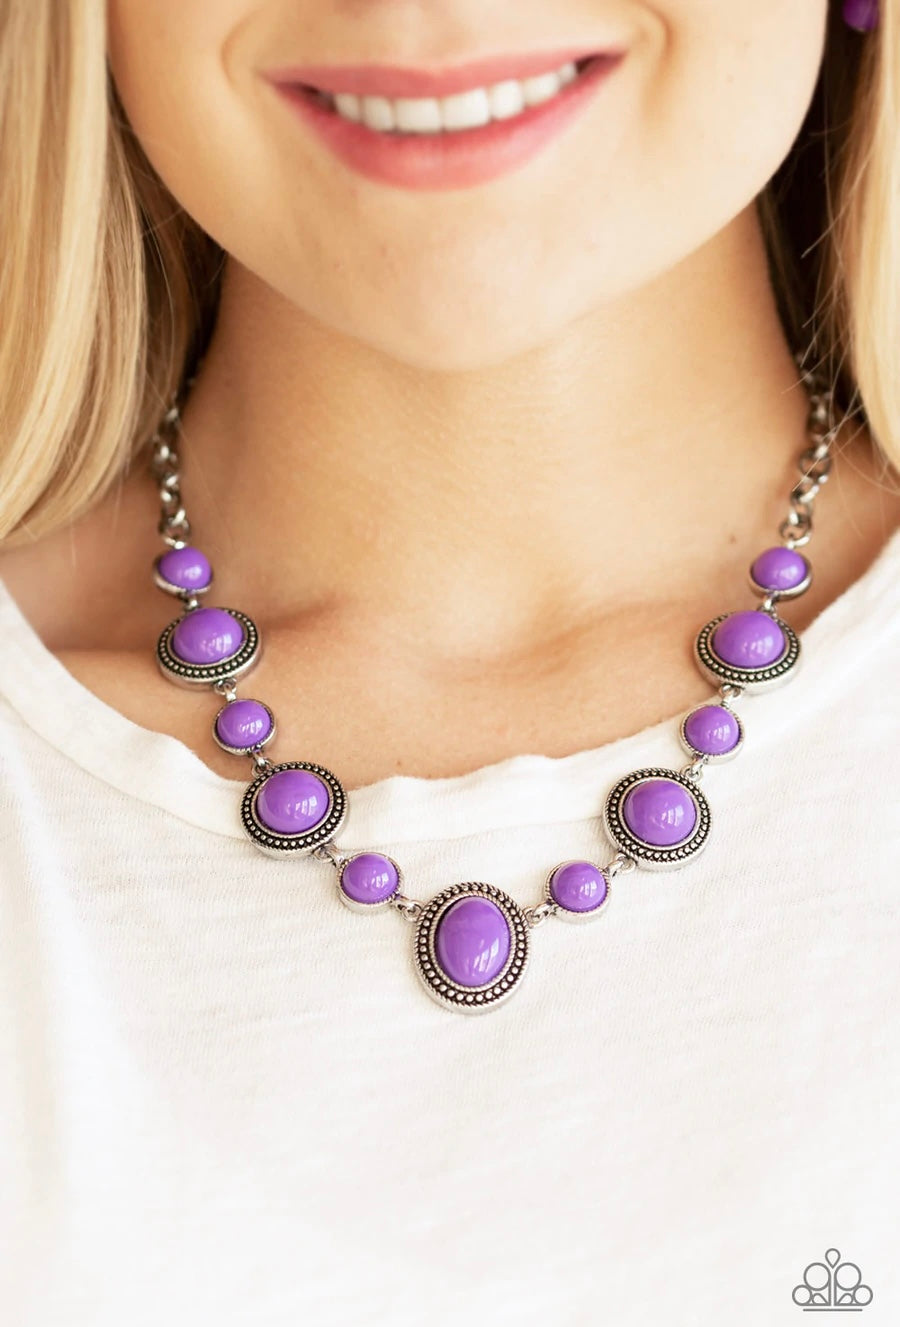 Paparazzi “Voyager Vibes” - Purple Necklace Earring Set